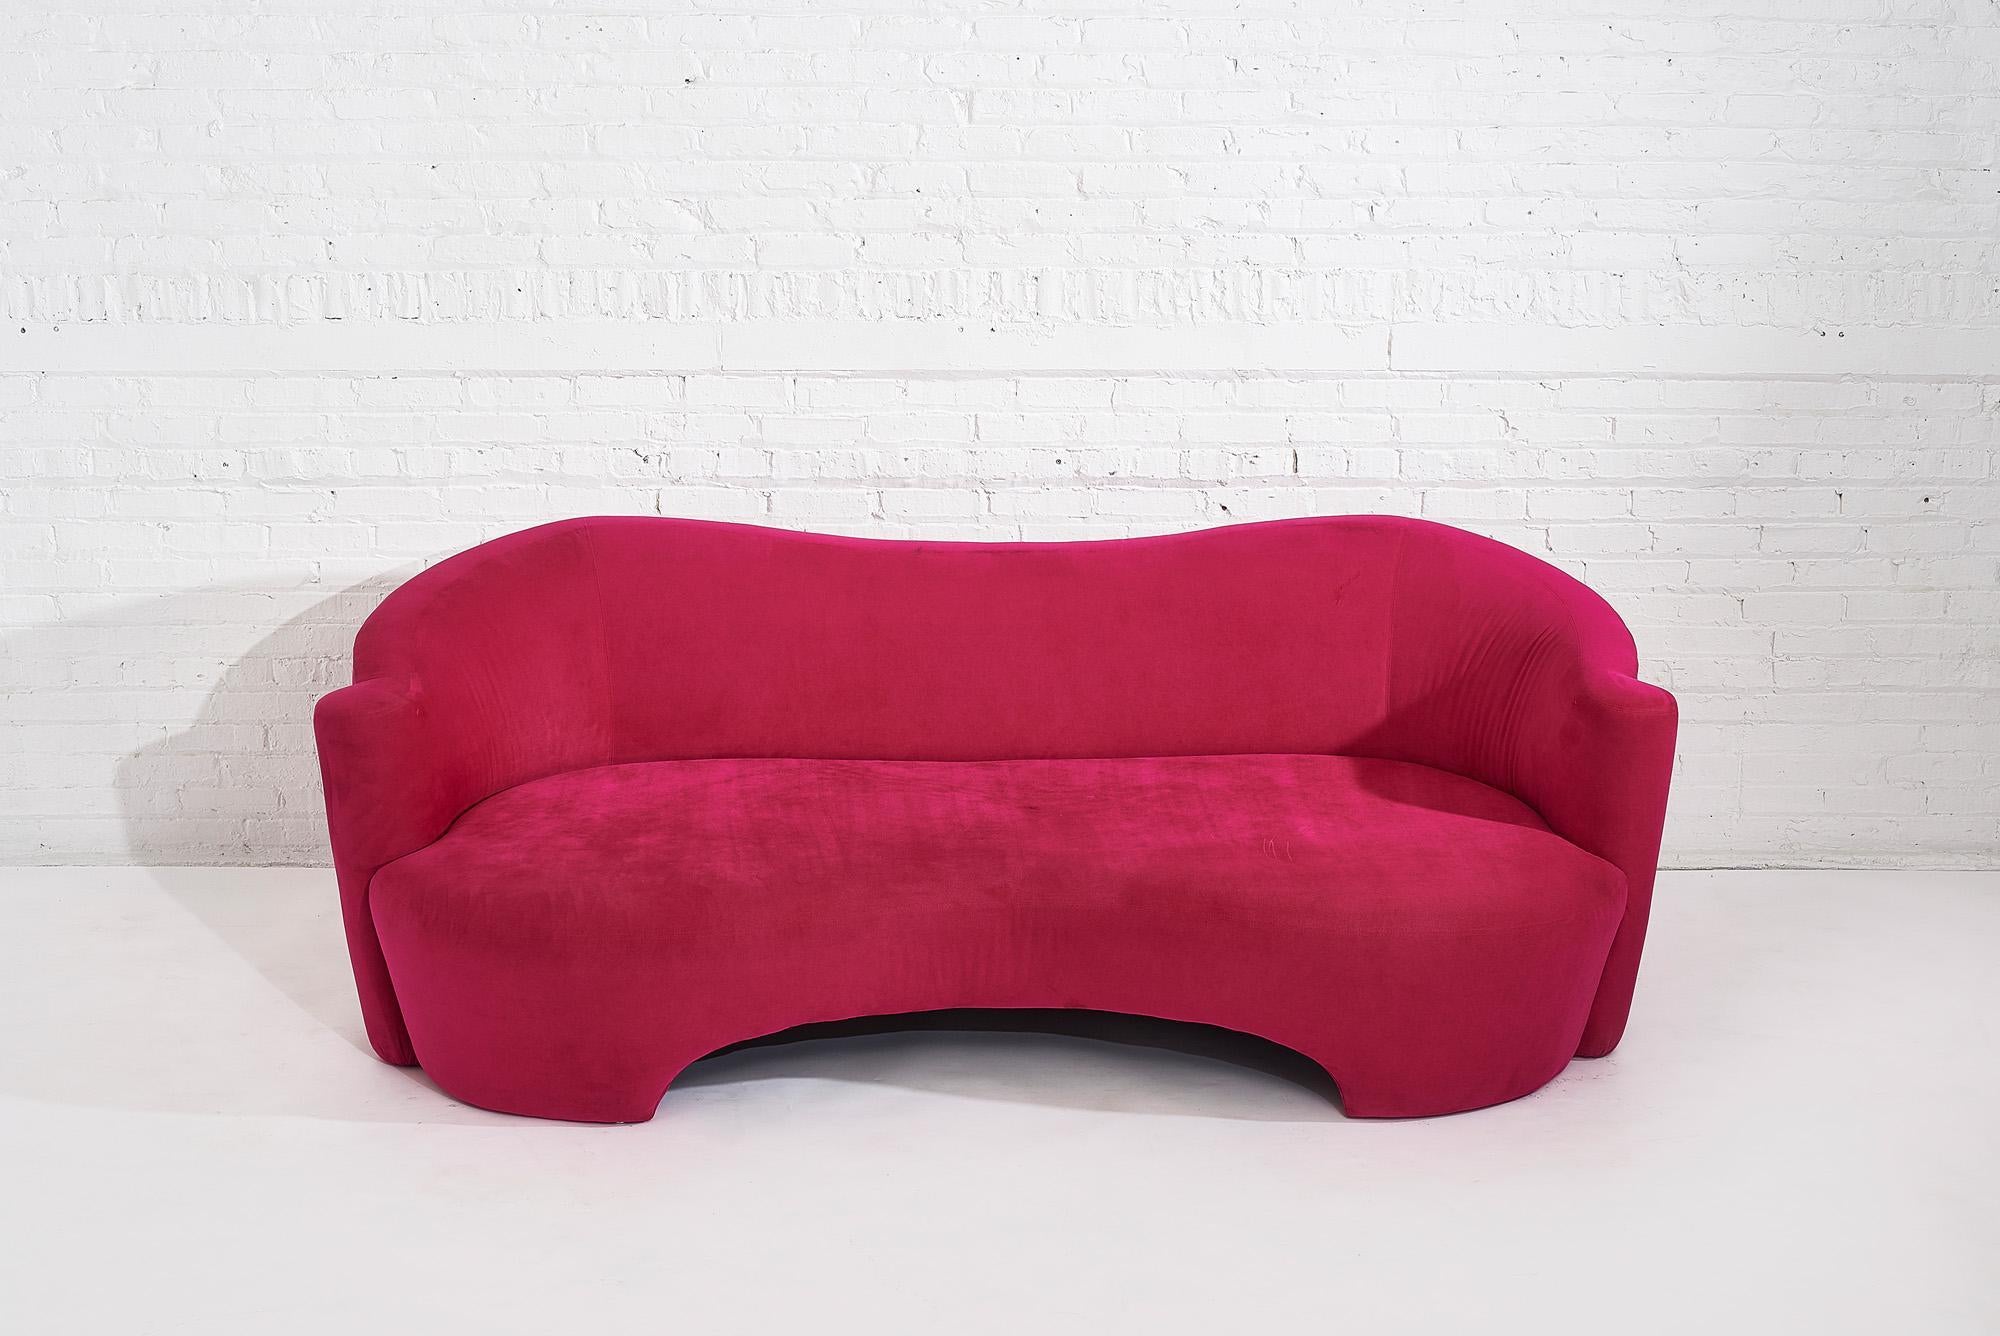 Pink sofa by Vladimir Kagan for Weiman. Pink micro suede upholstery, circa 1990.